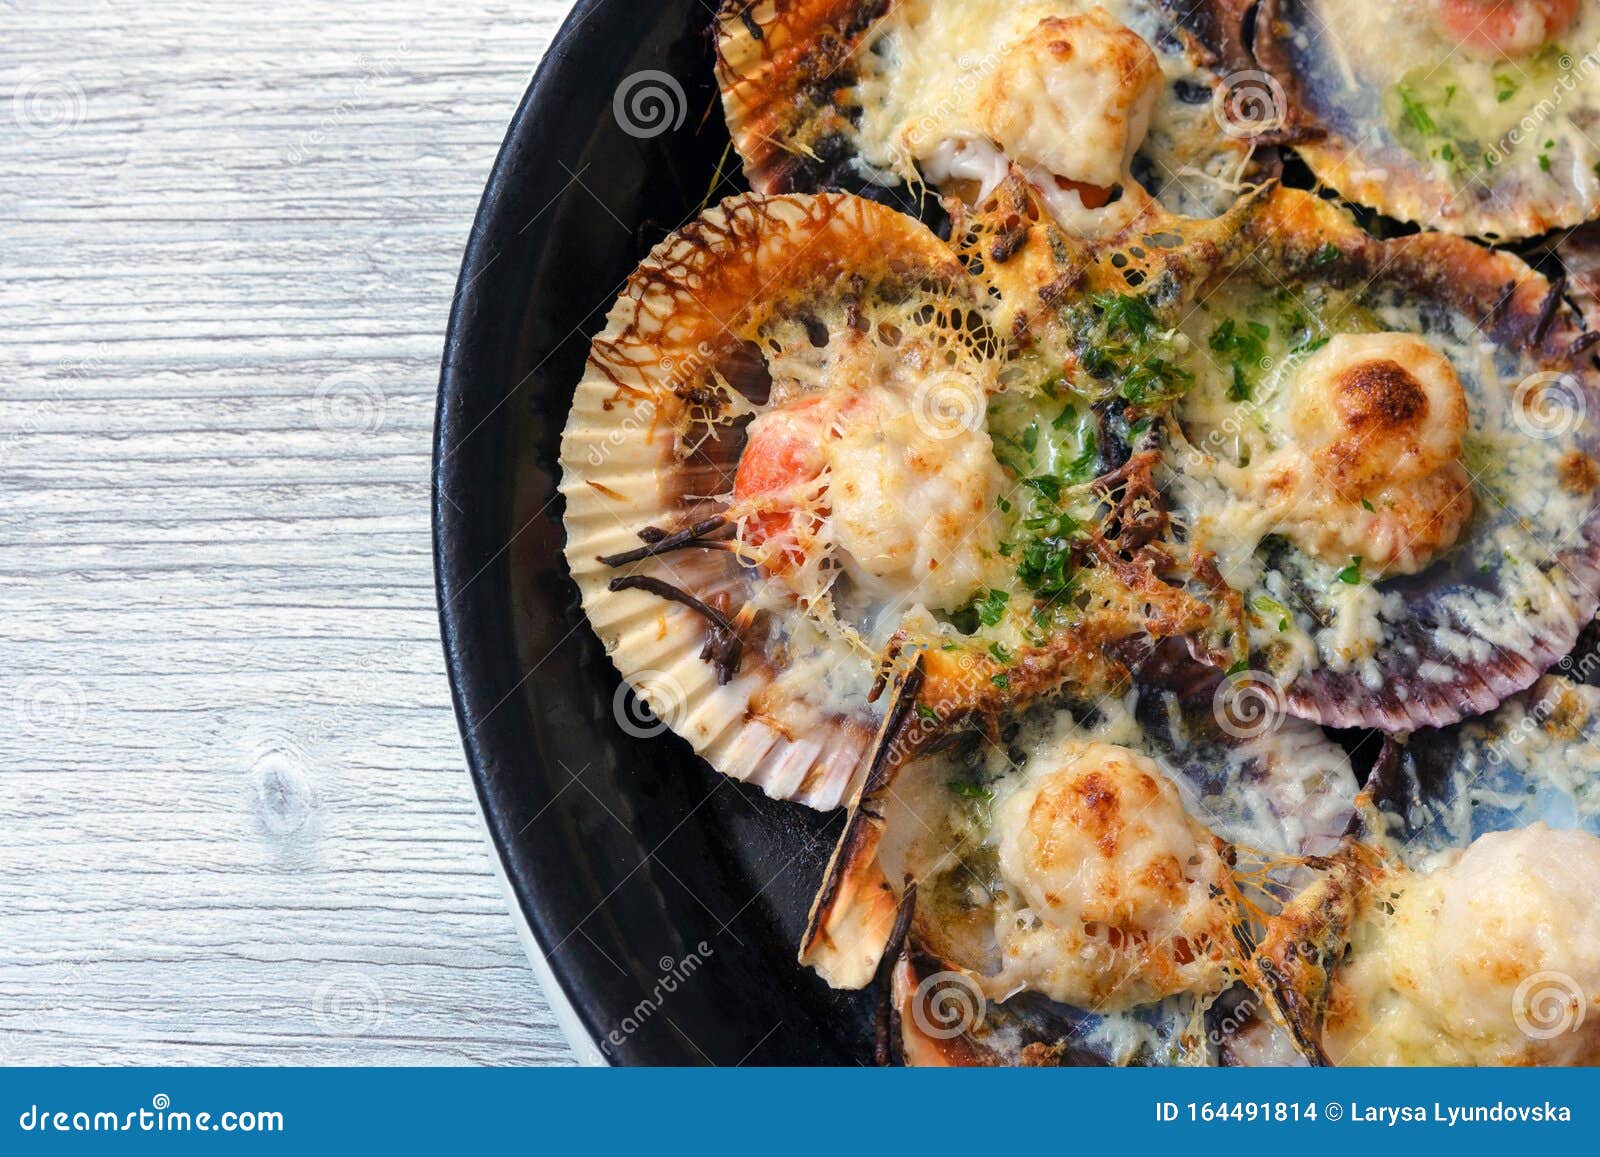 Baked Scallops With Cheese And Spicy Sauce Delicate Is A Real Pleasure Romantic Dinner At A Spanish Fish Restaurant Stock Photo Image Of Fresh Delicious 164491814,How To Bbq Ribs